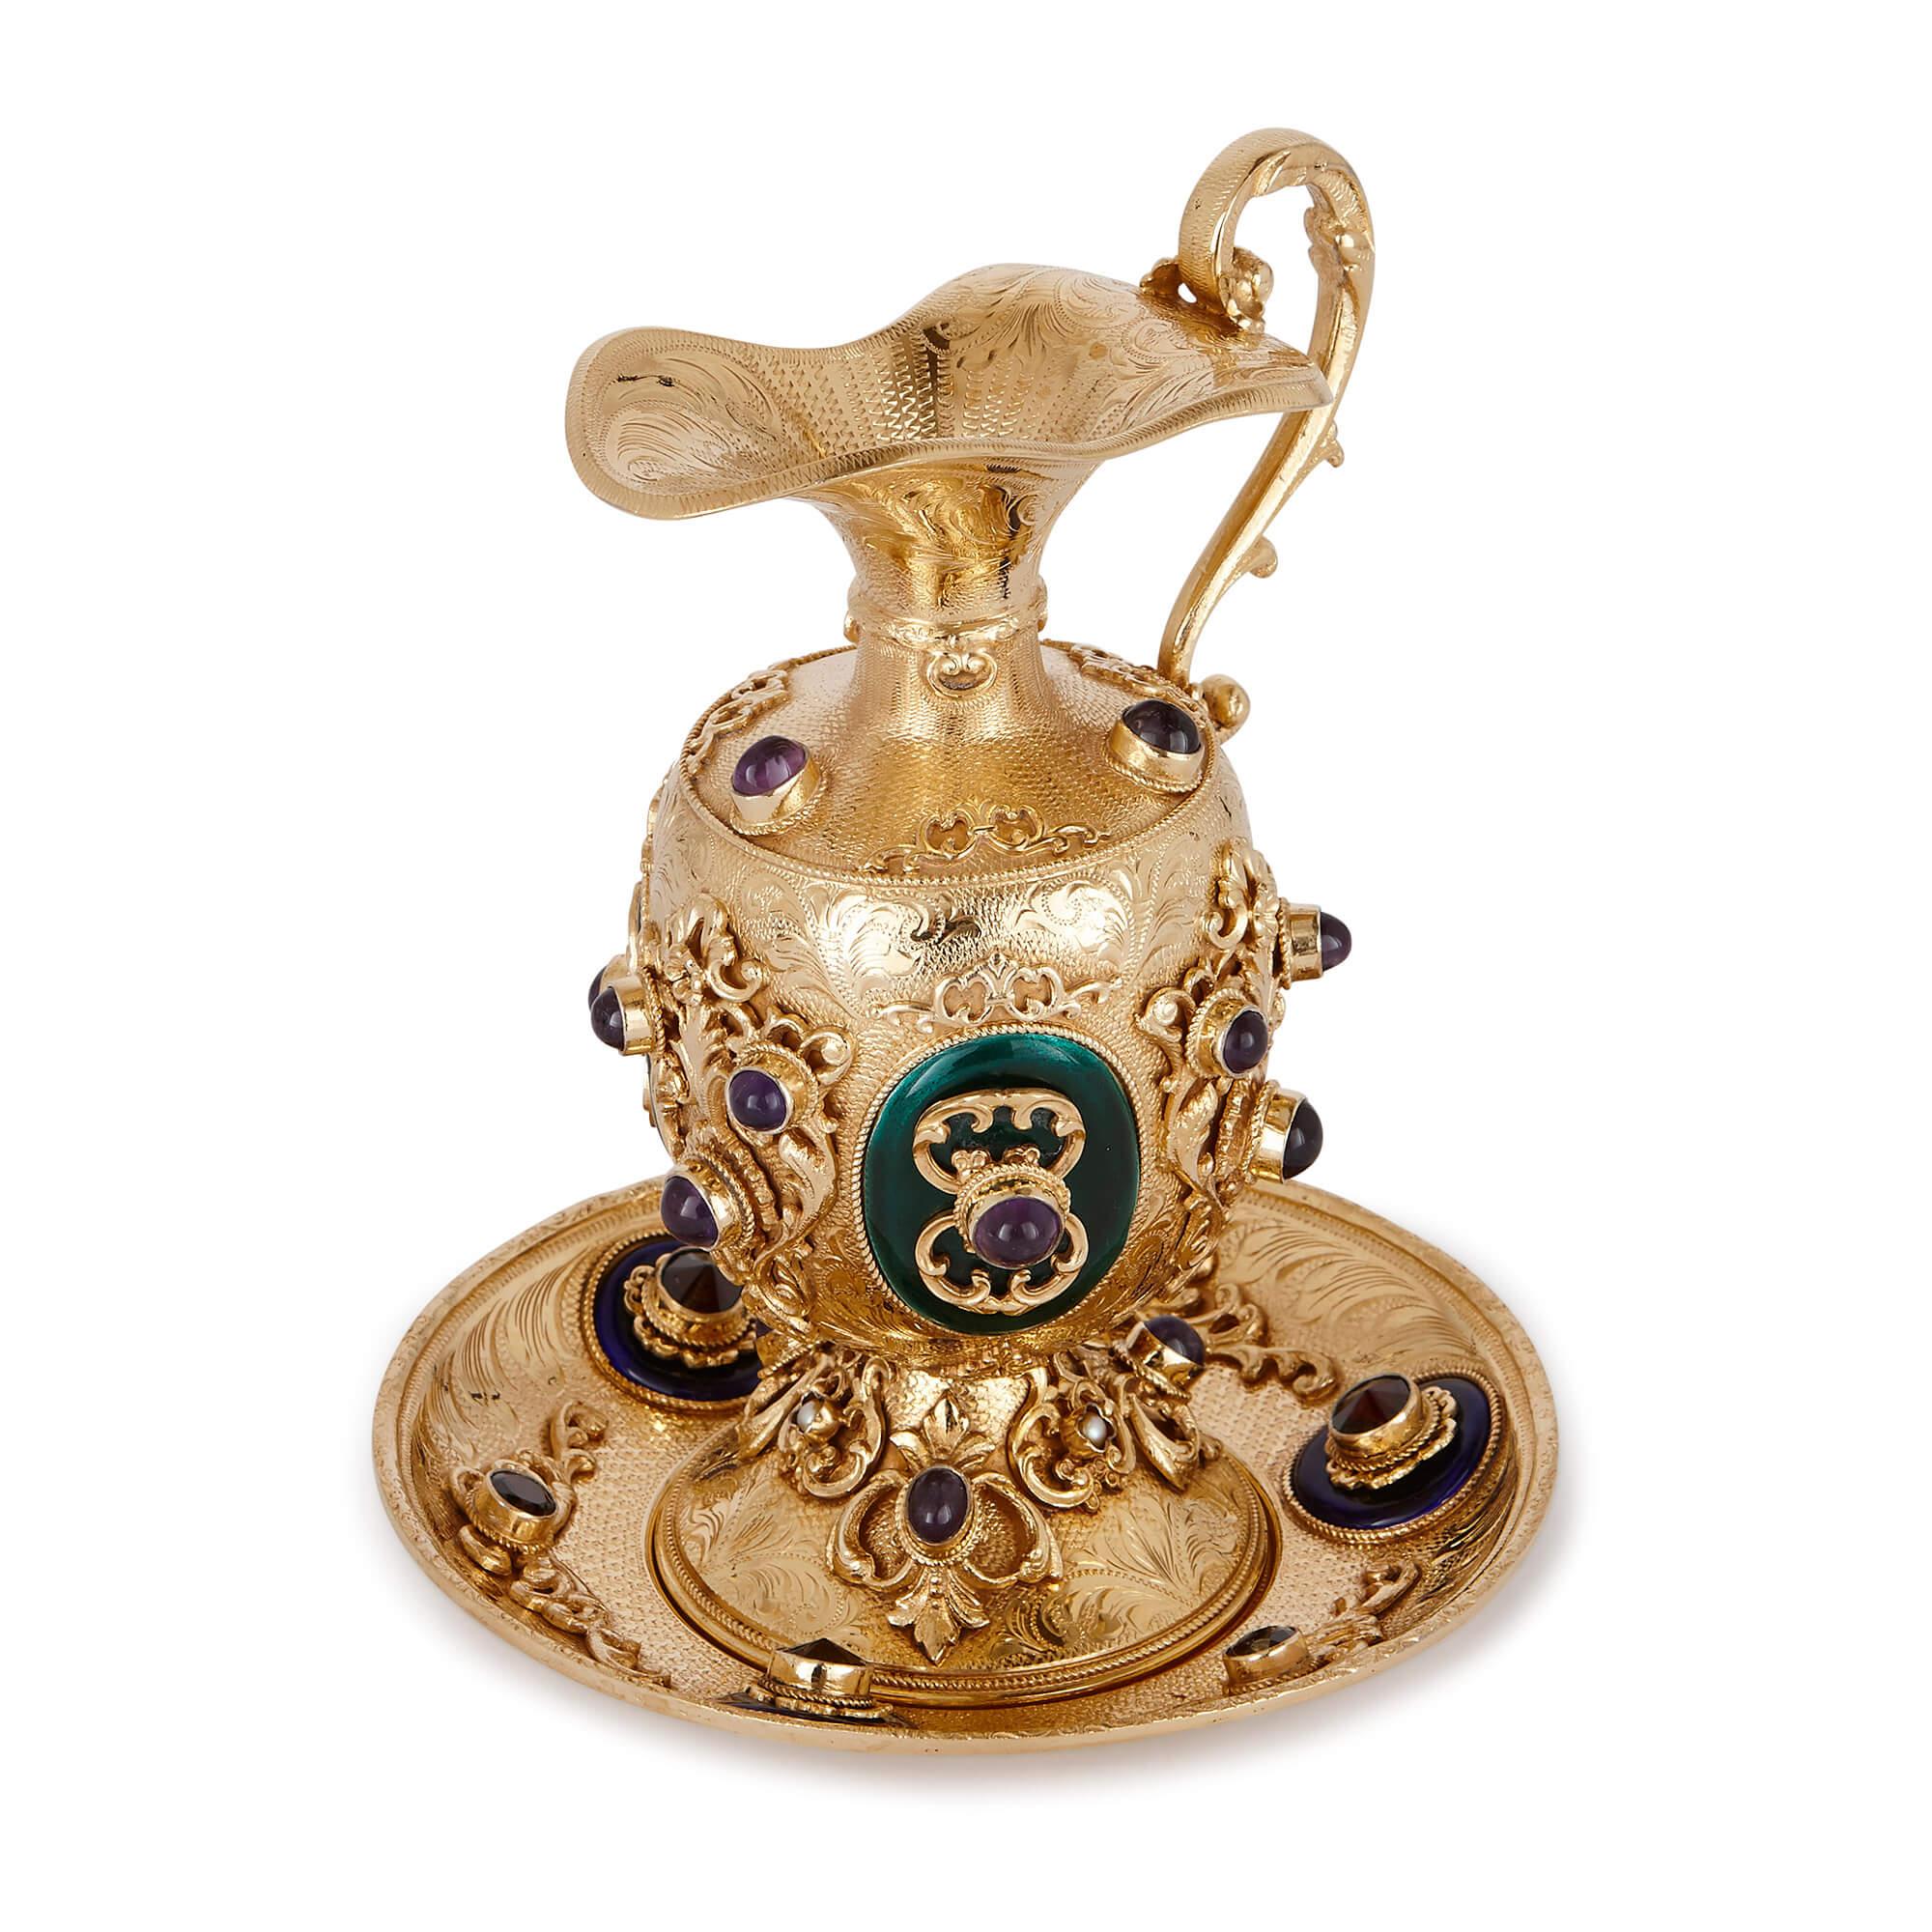 This miniature jug and basin was crafted at the beginning of the 20th century from a combination of silver-gilt, enamel and precious gemstones. 

The surface of the shallow basin is embossed with scrolling floral motifs and other, more abstract